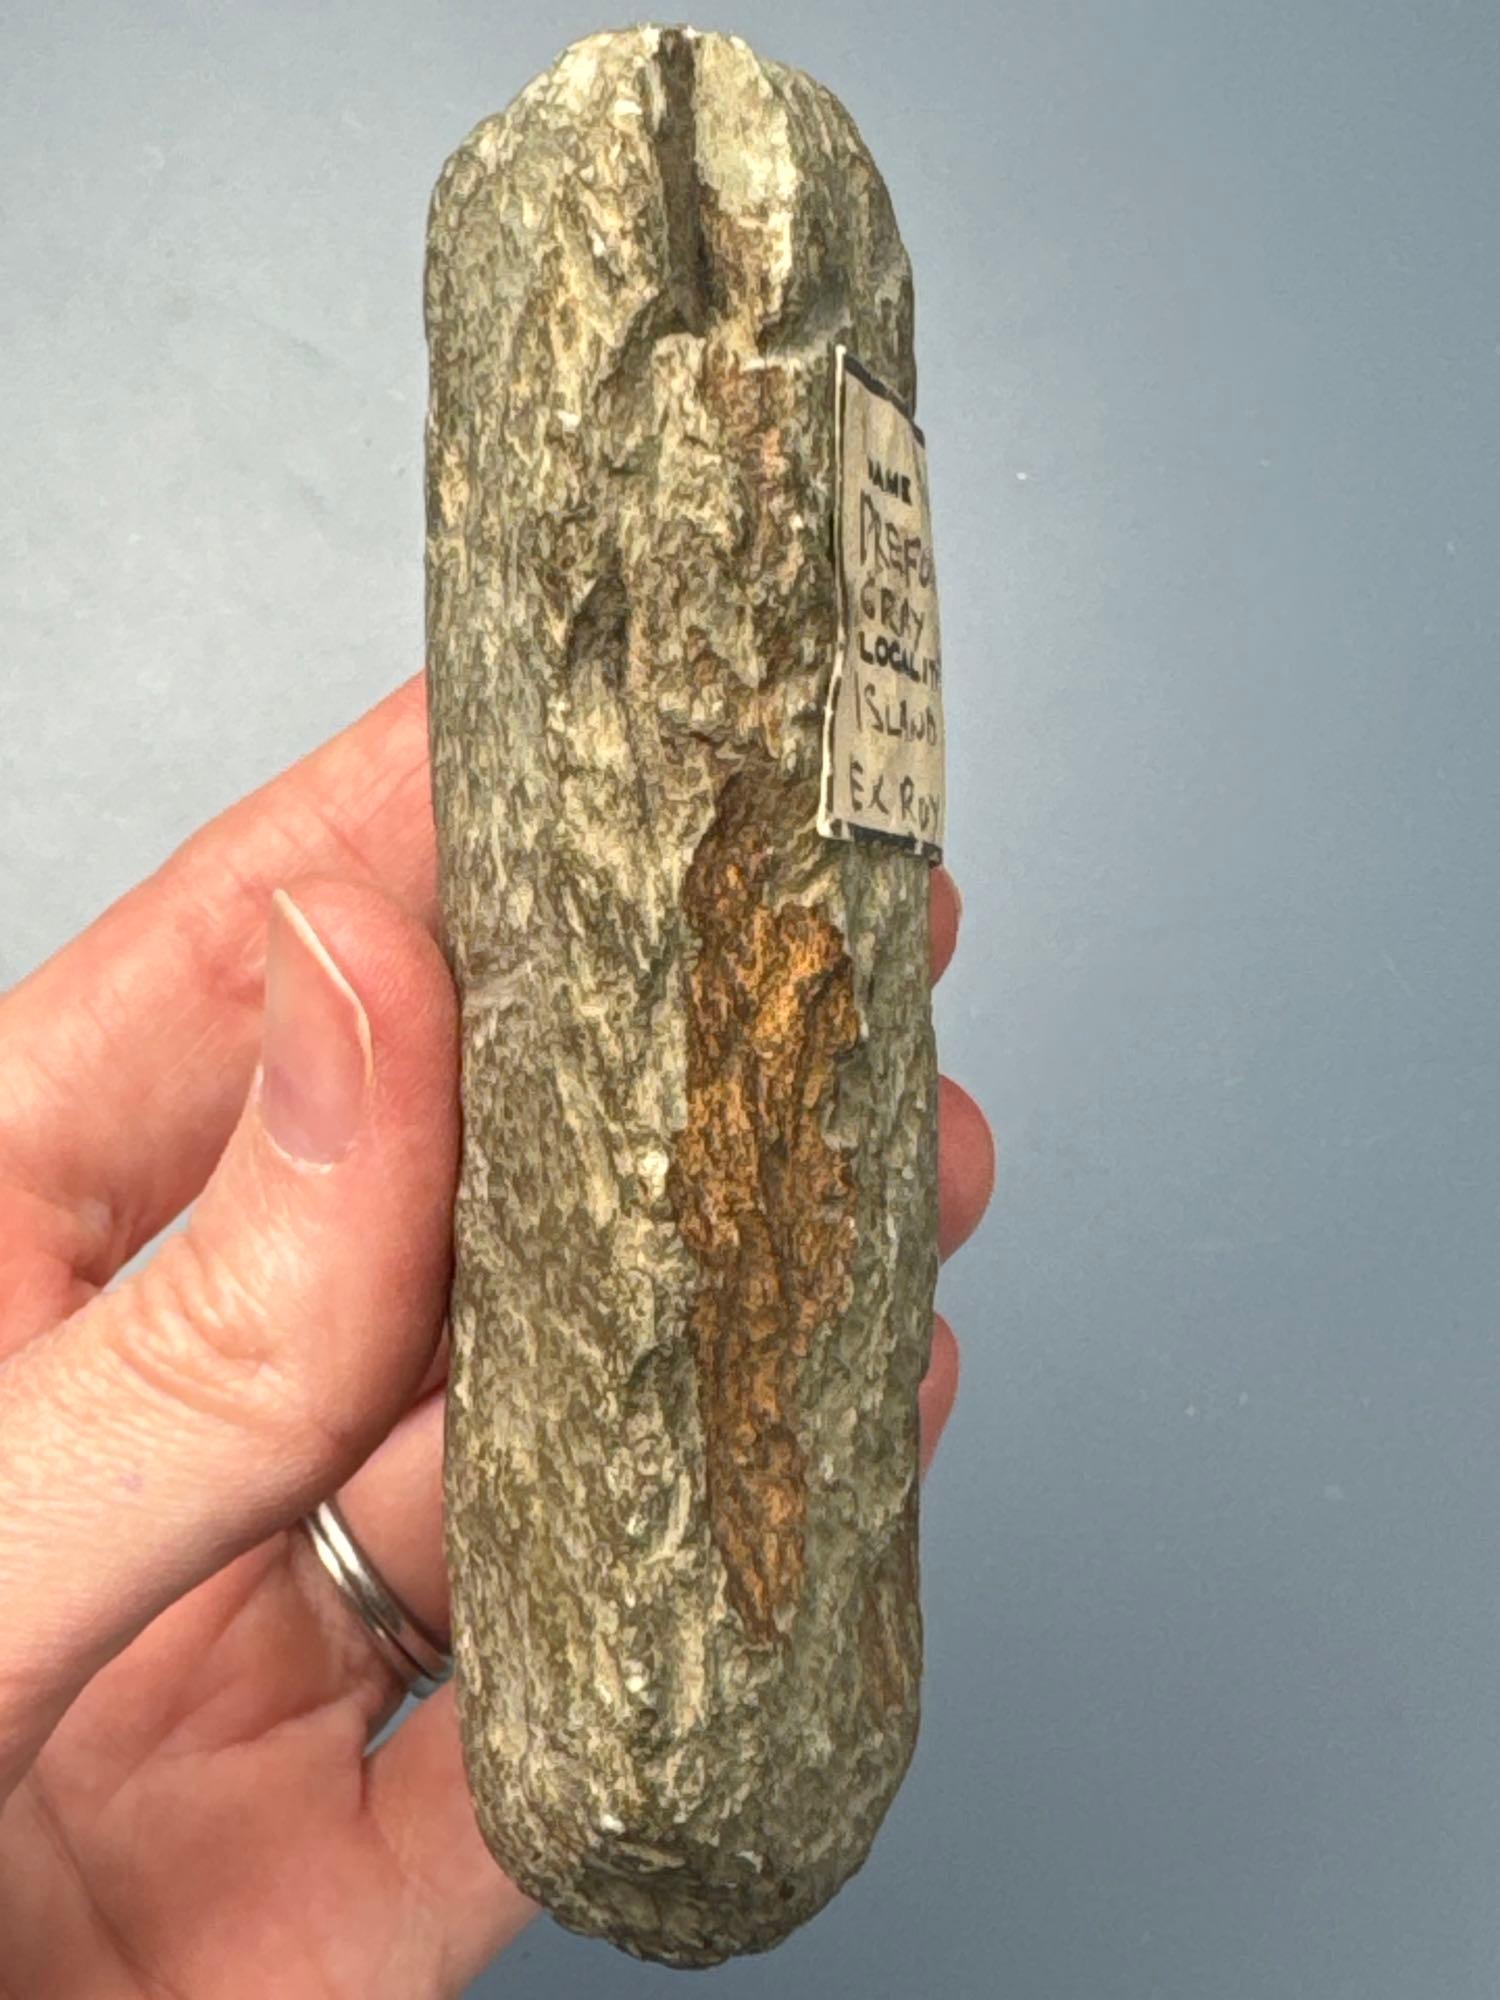 4 1/2" Shield Bannerstone Preform, Found on Three Mile Island, Dauphin Co., PA, DRILLING STARTED, Ex